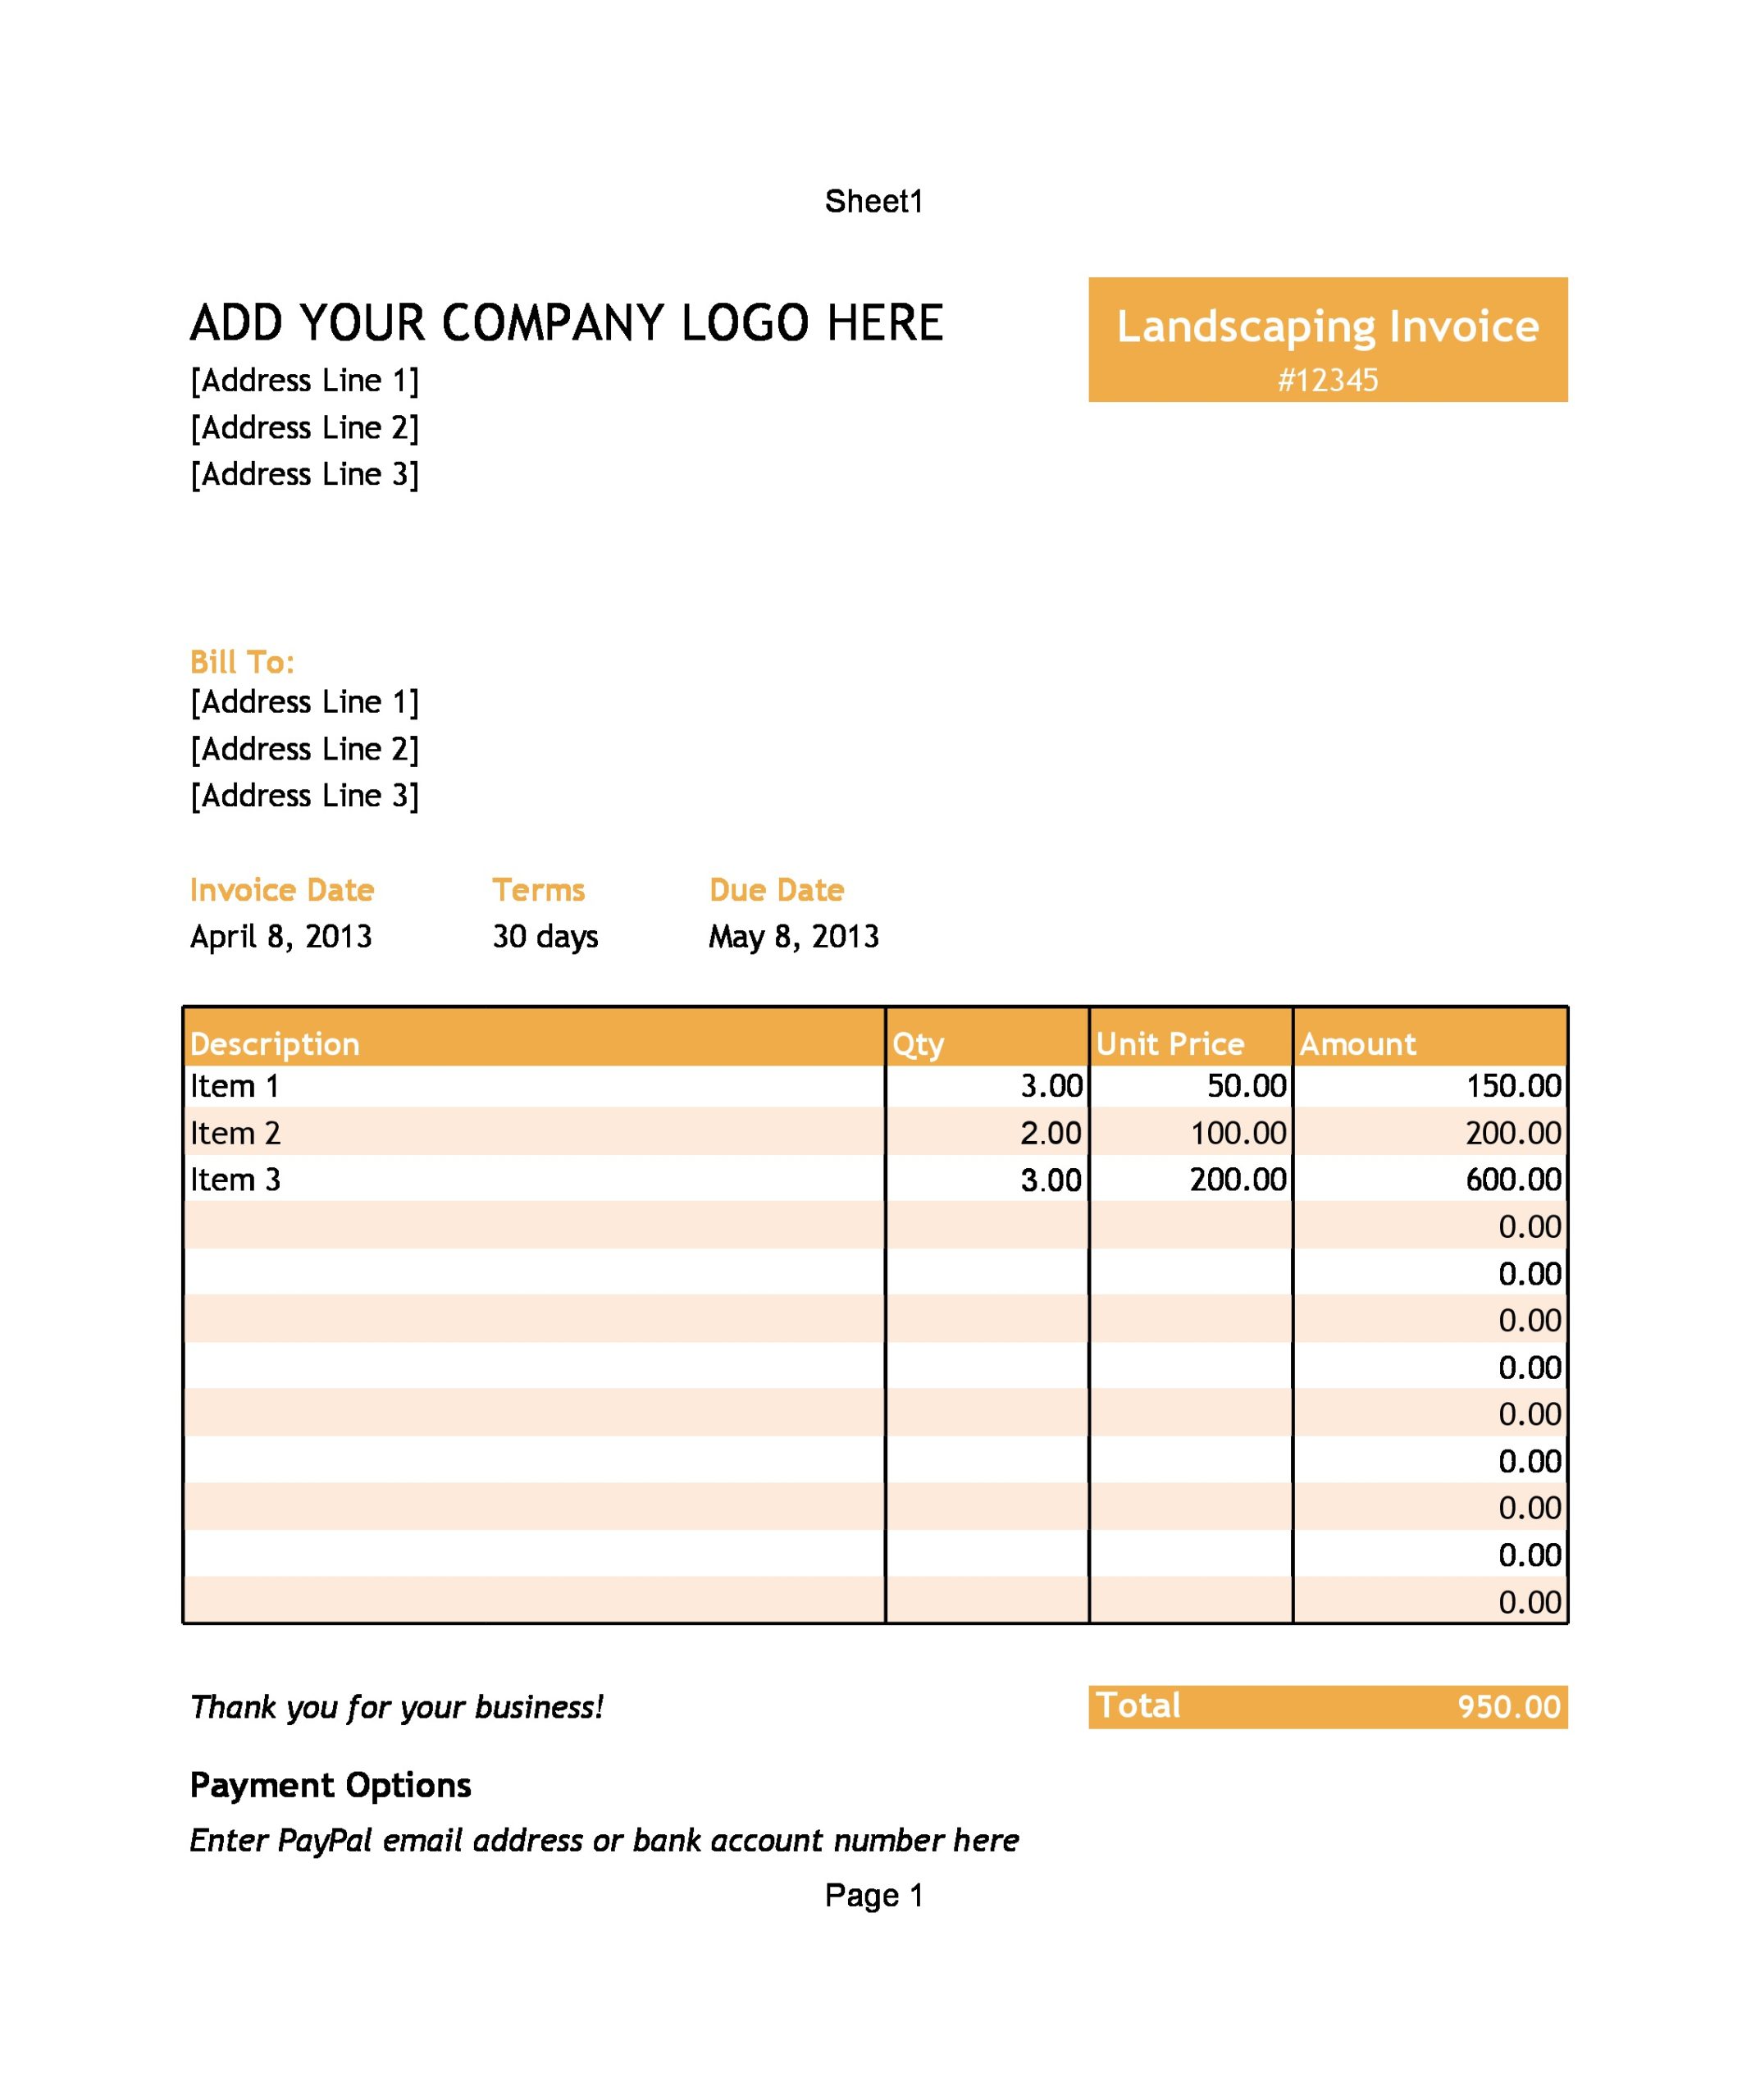 Free landscaping invoice 17